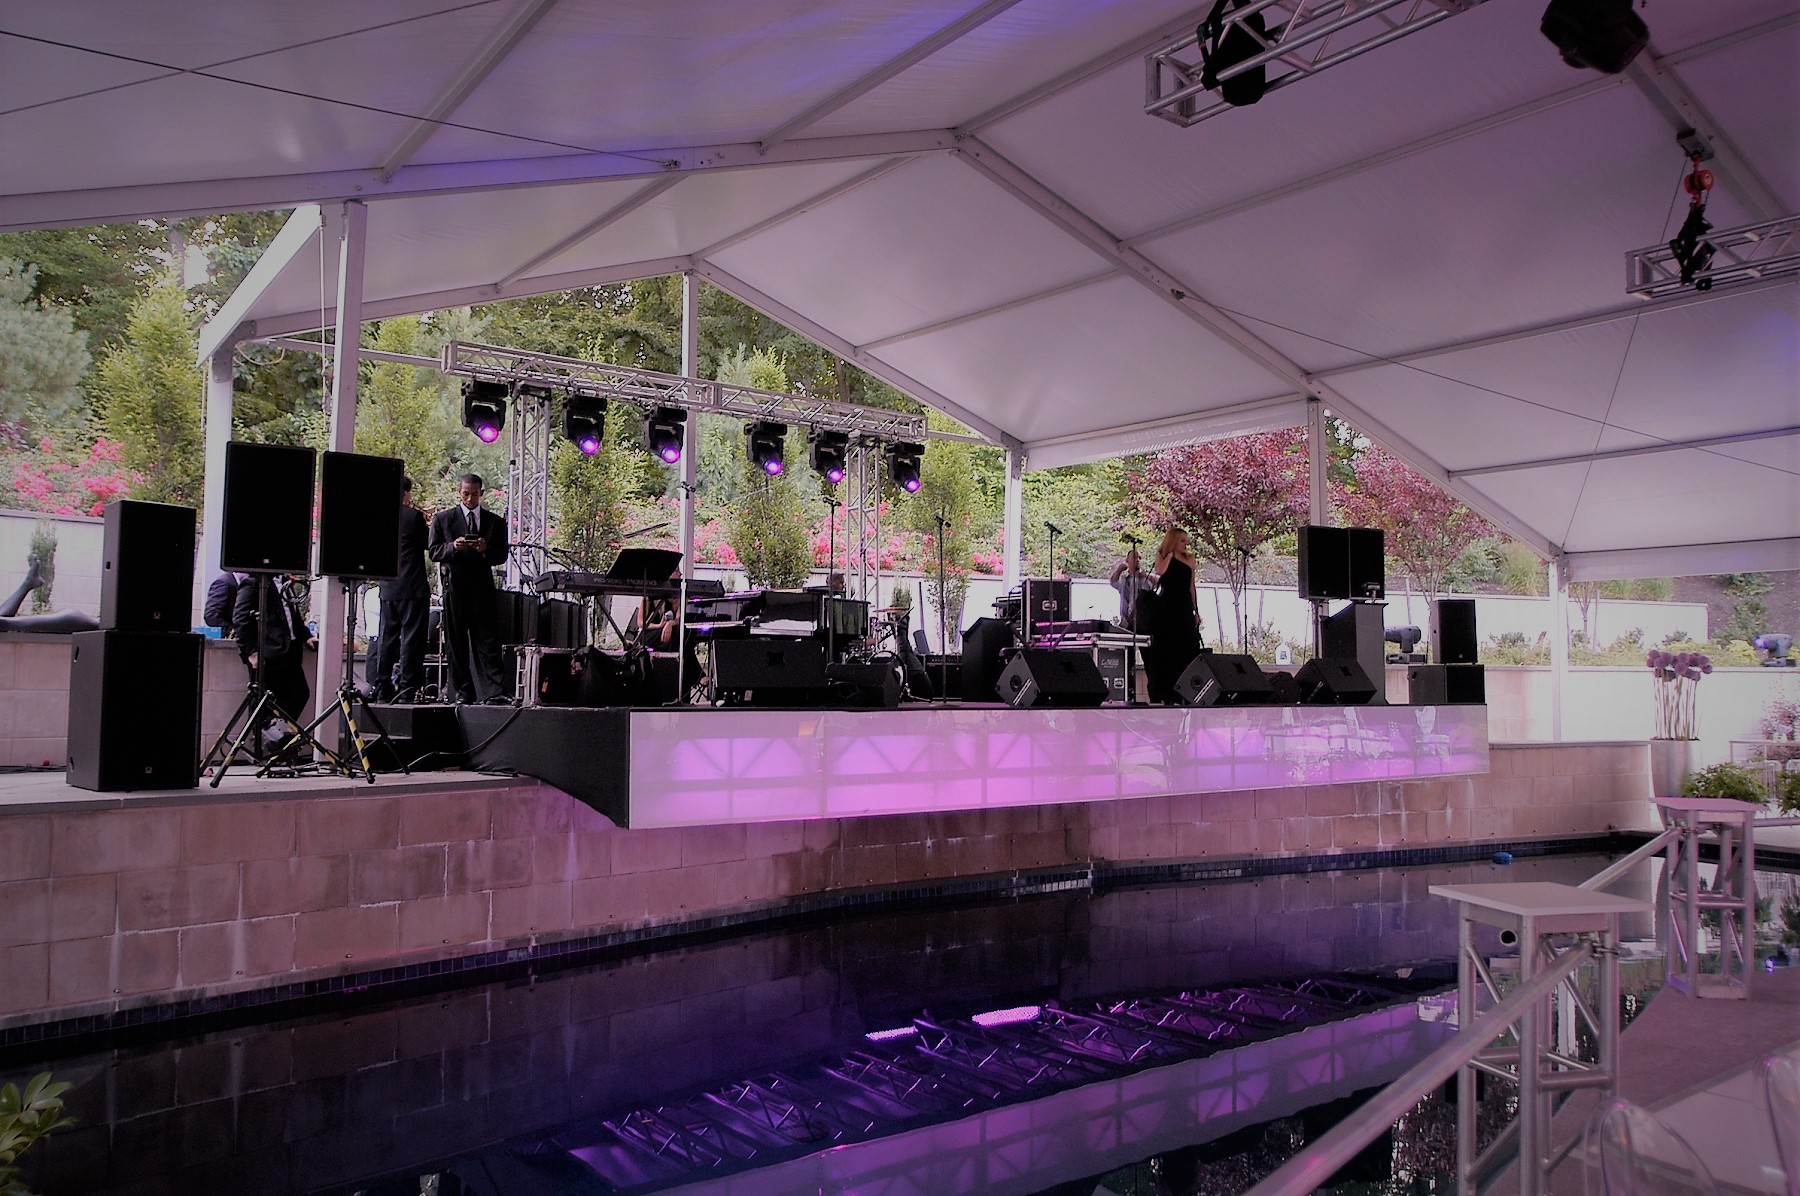 Cantilevered Stage Over Waterfall Pool Backyard Parties Anniversary Celebrations